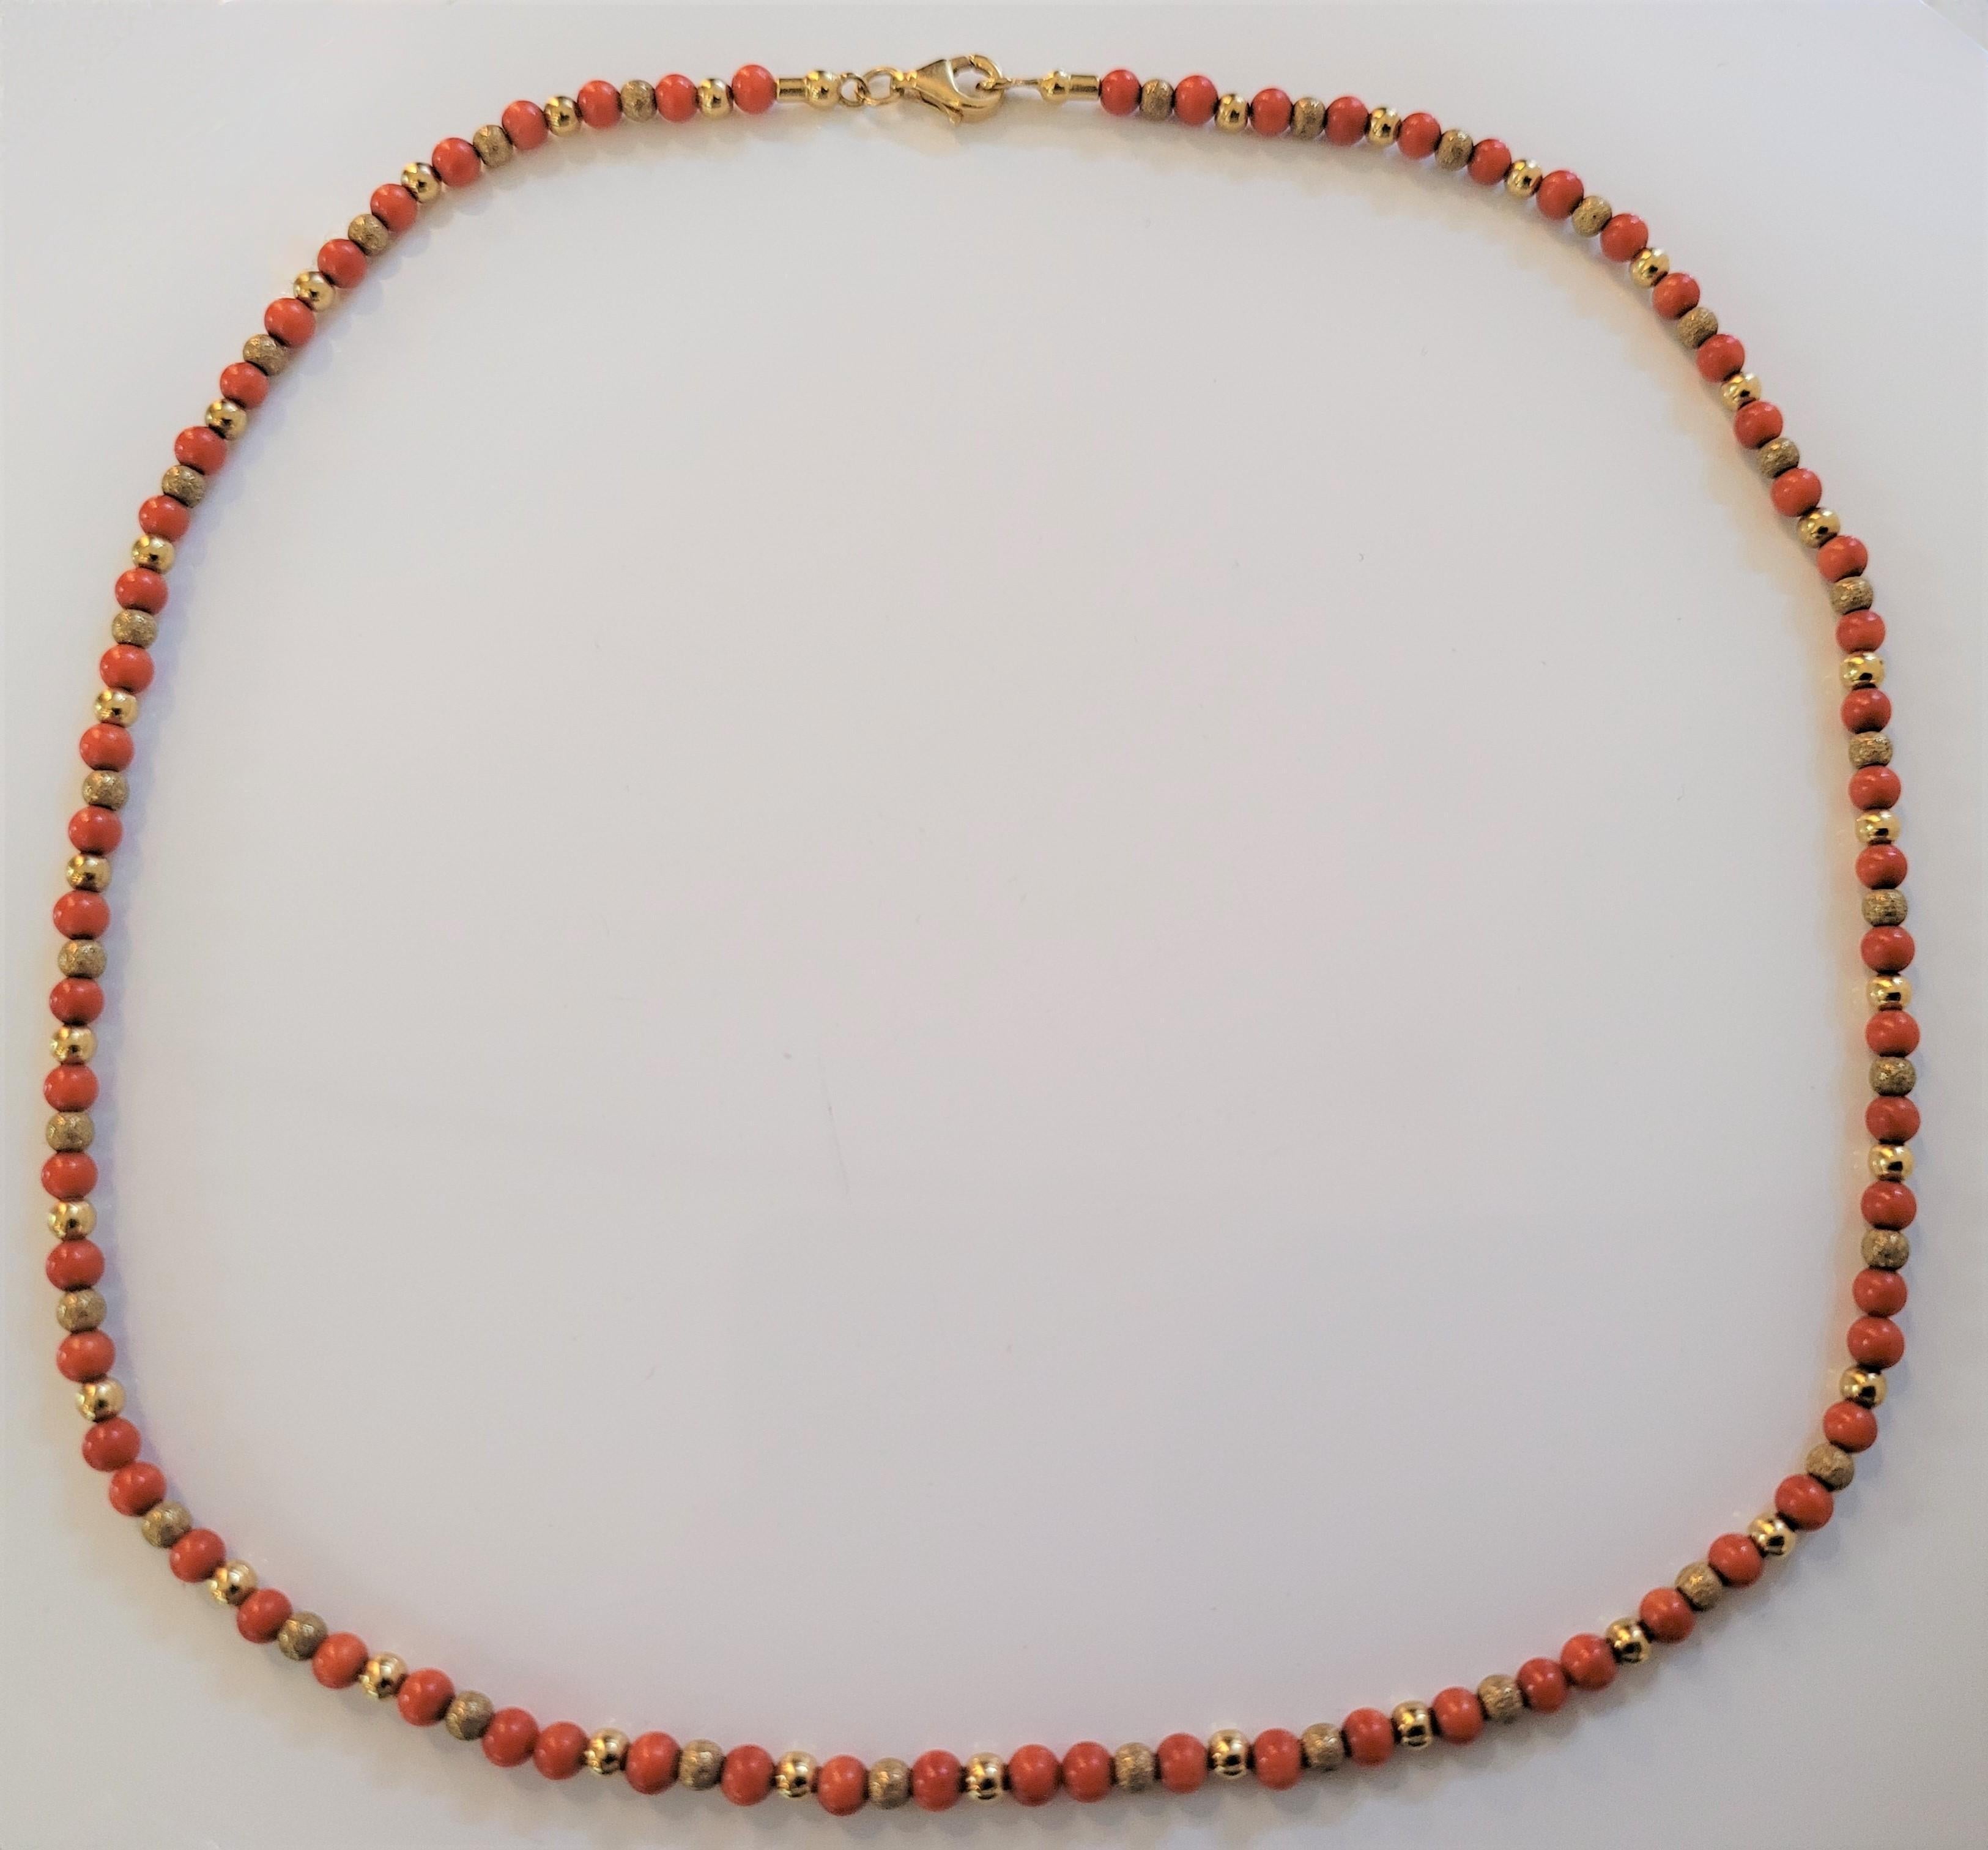 Unbranded Coral Bead Chain
Metal 14K yellow Gold 
Coral Beads 3.3mm
Chain Length 17'' Long
Chain Weight 11.7gr
Gender Women
Condition New, without tags 
Retail Price:$3000